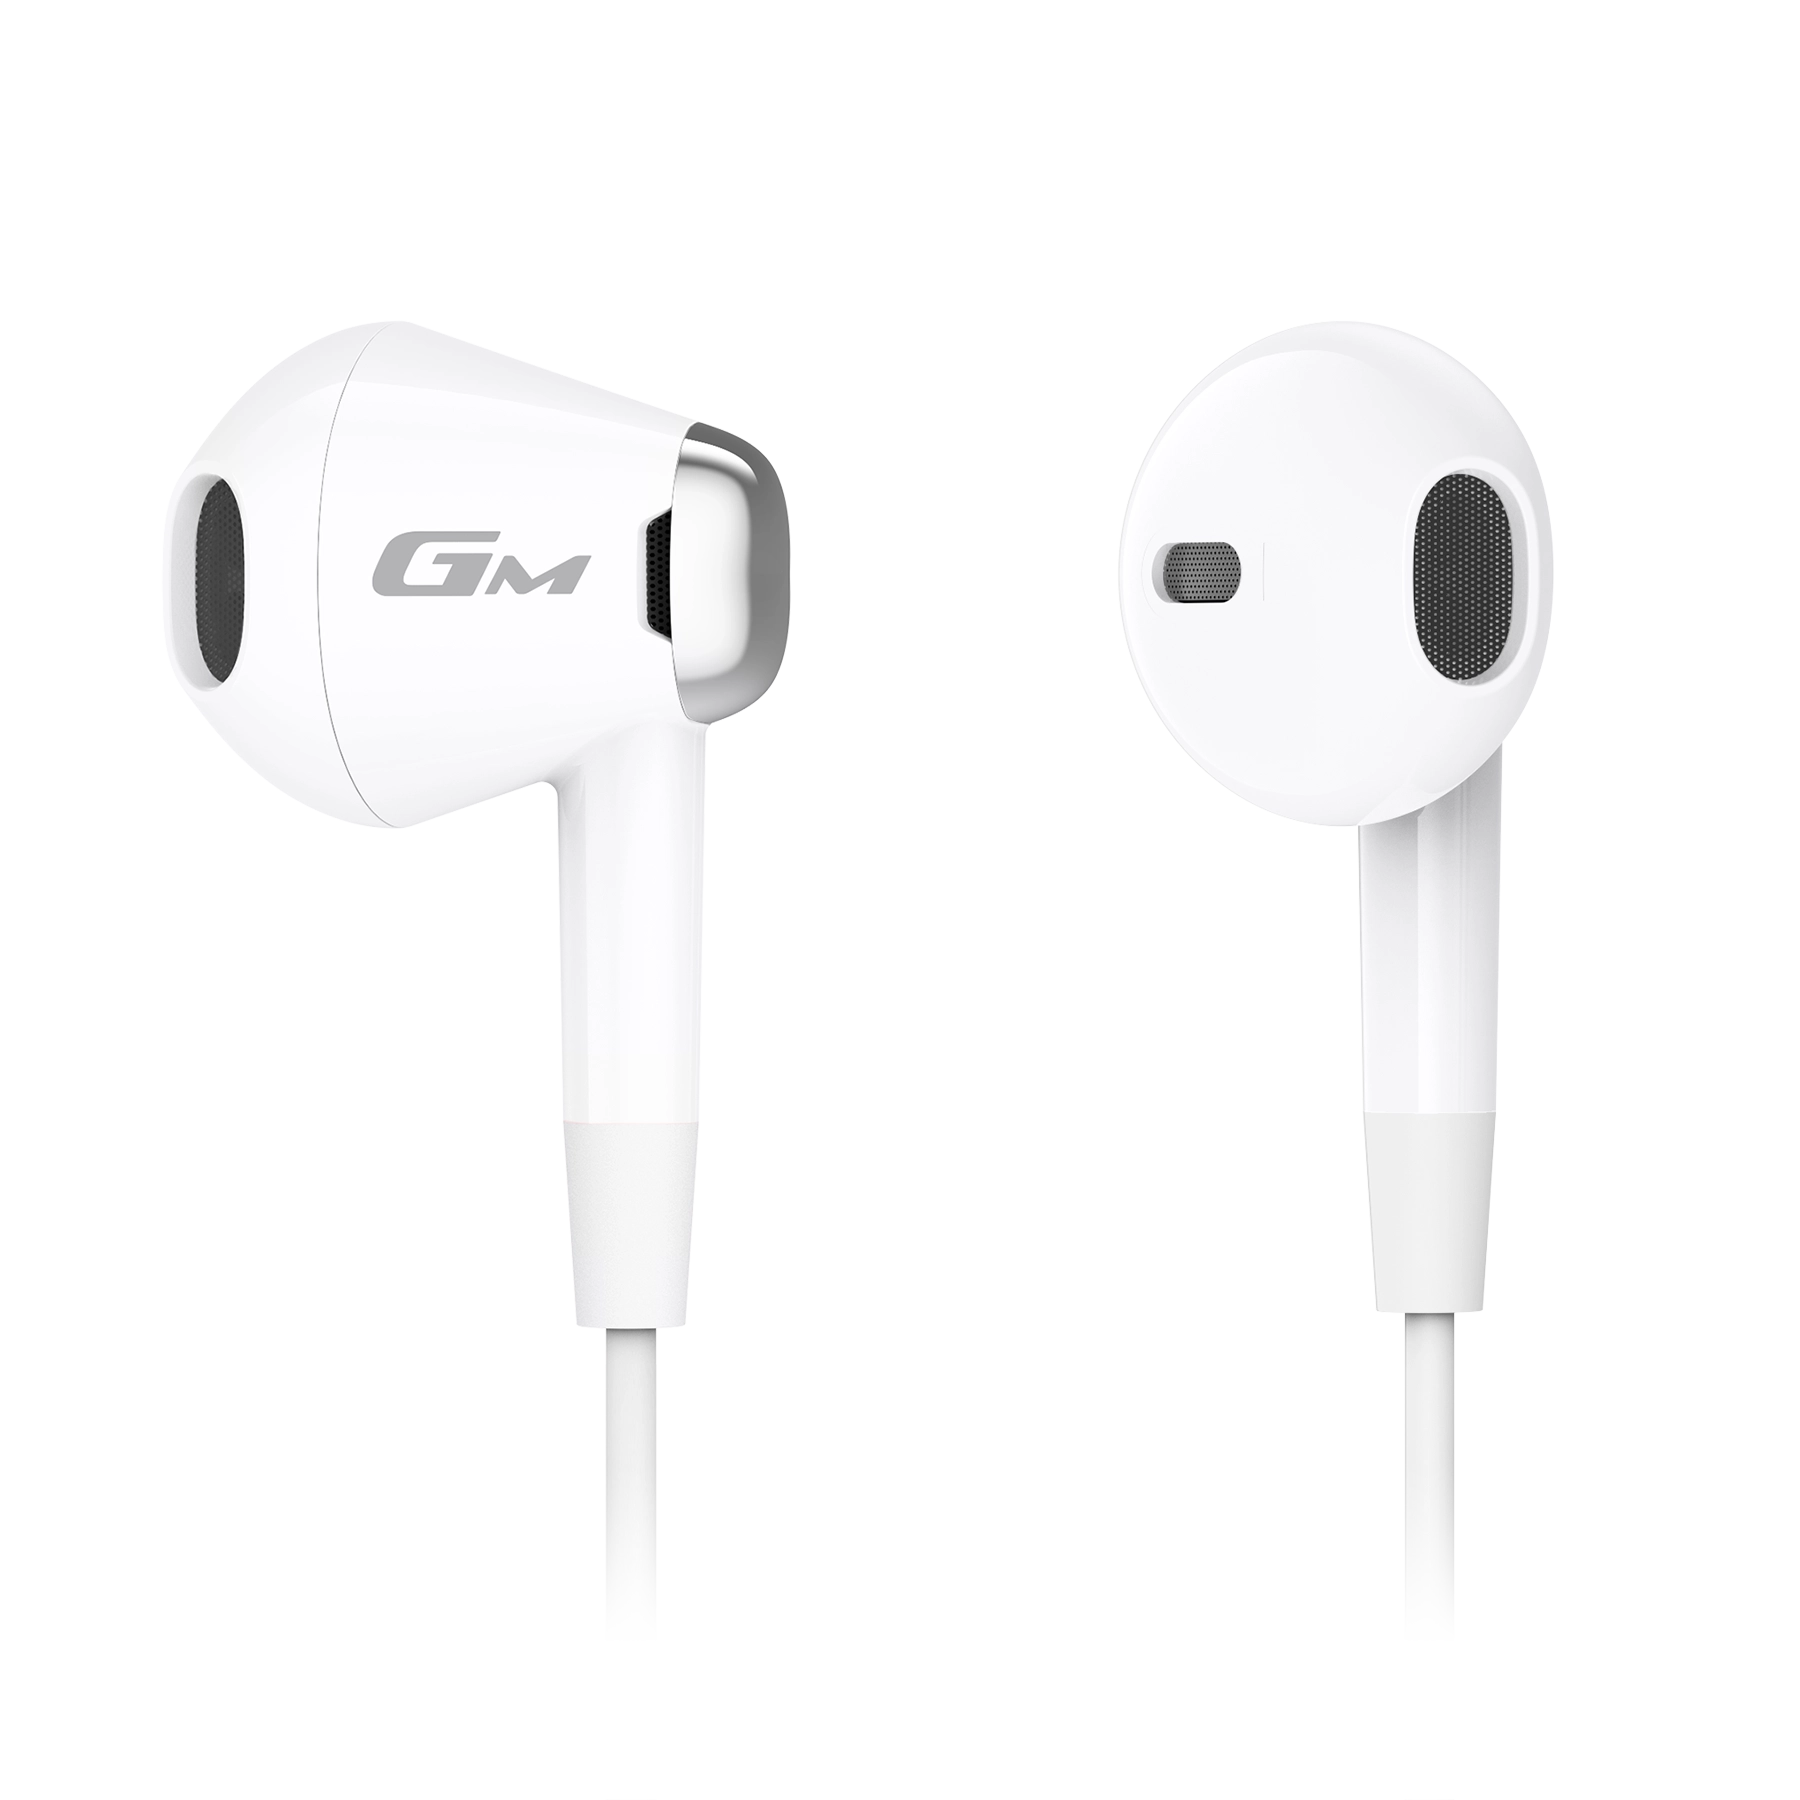 GM180 PLUS Earbuds Product Pictures white_3